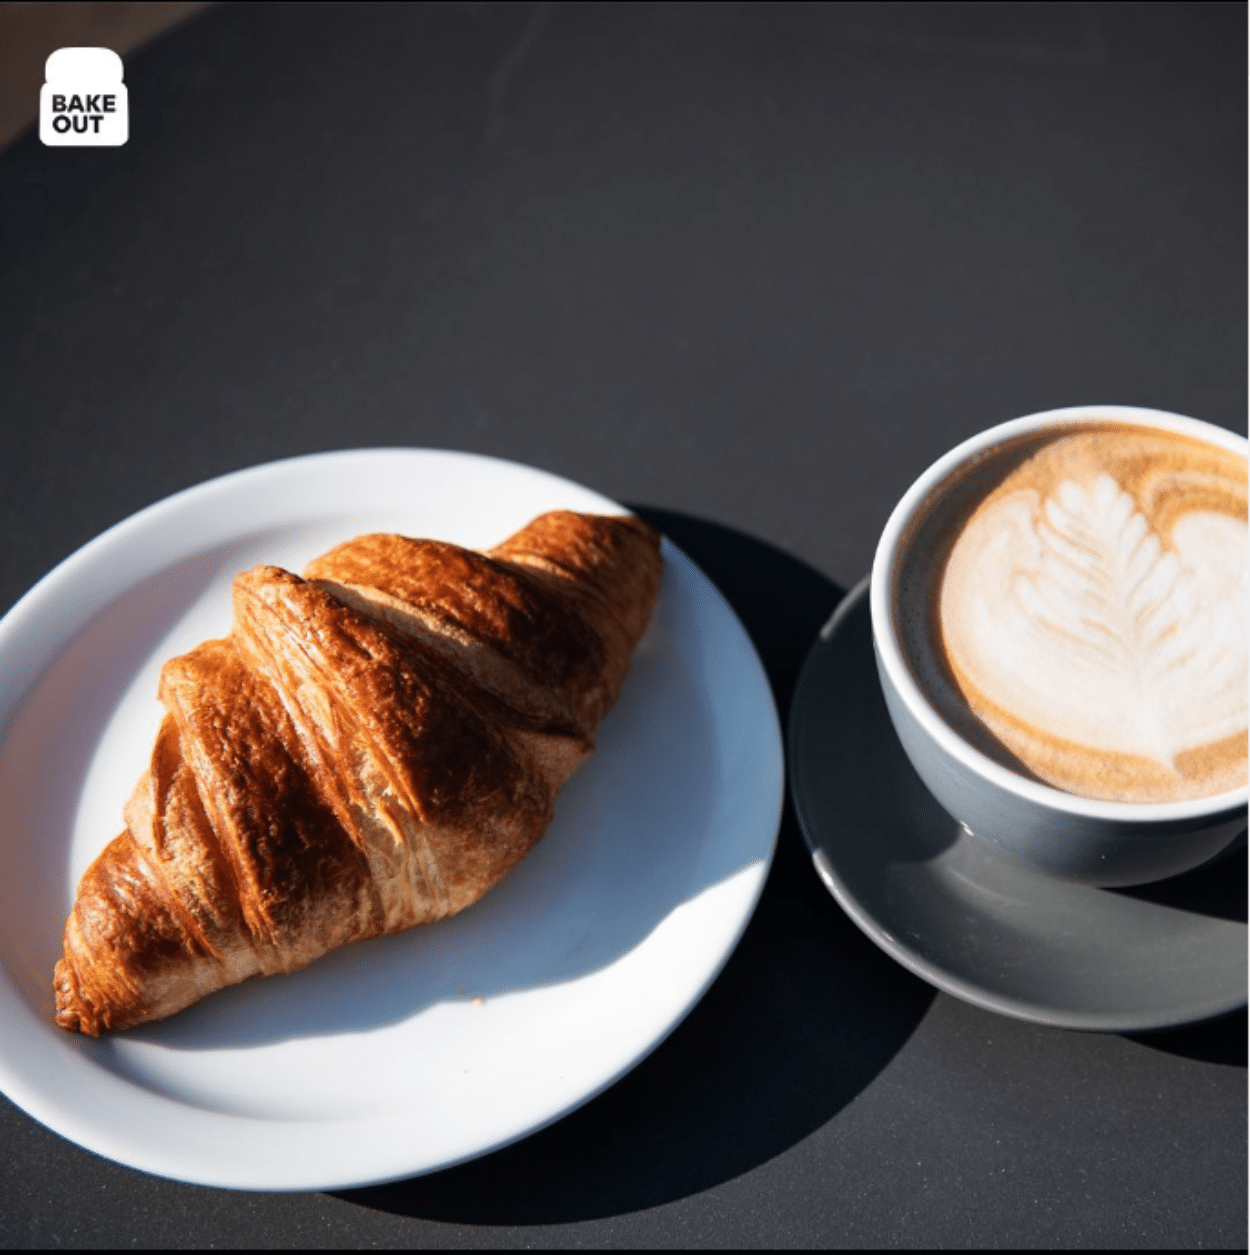 croissant and a cup of coffee